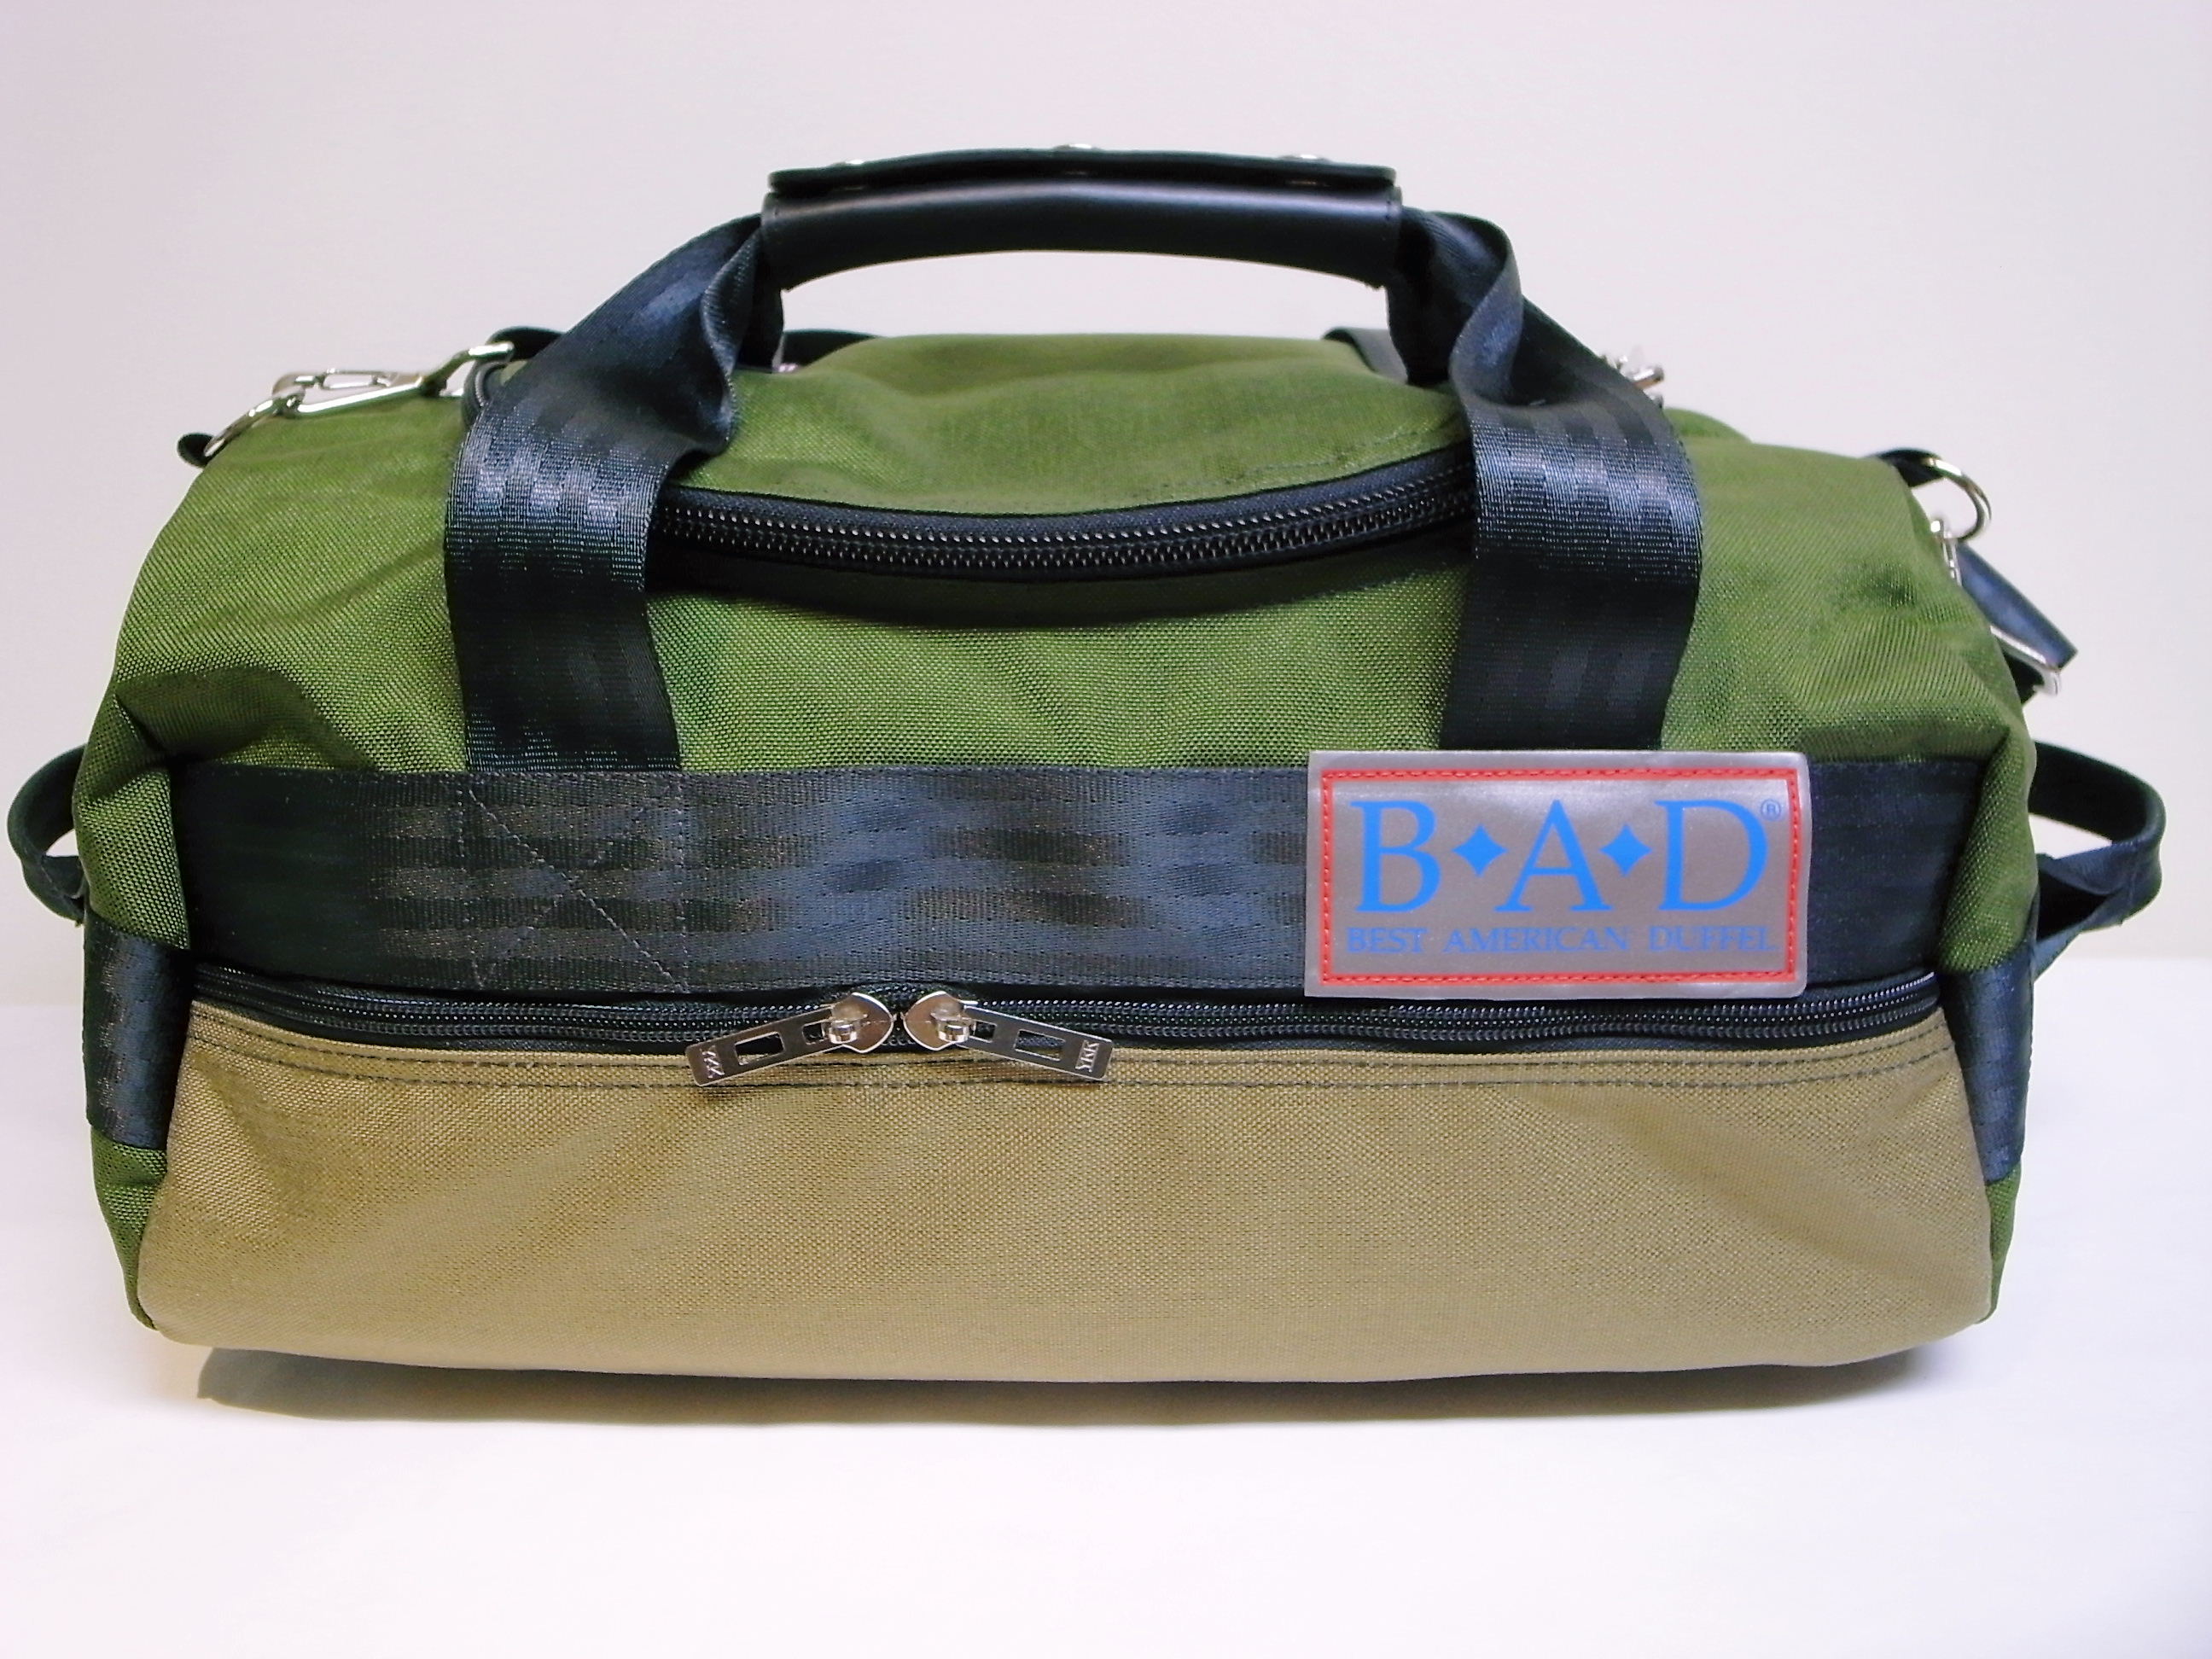 BAD BAGS Duffel #1.5 SPECIAL 3WAY BAG バッドバッグ 3ウェイバッグ | UTILITY Outdoor  Select Shop